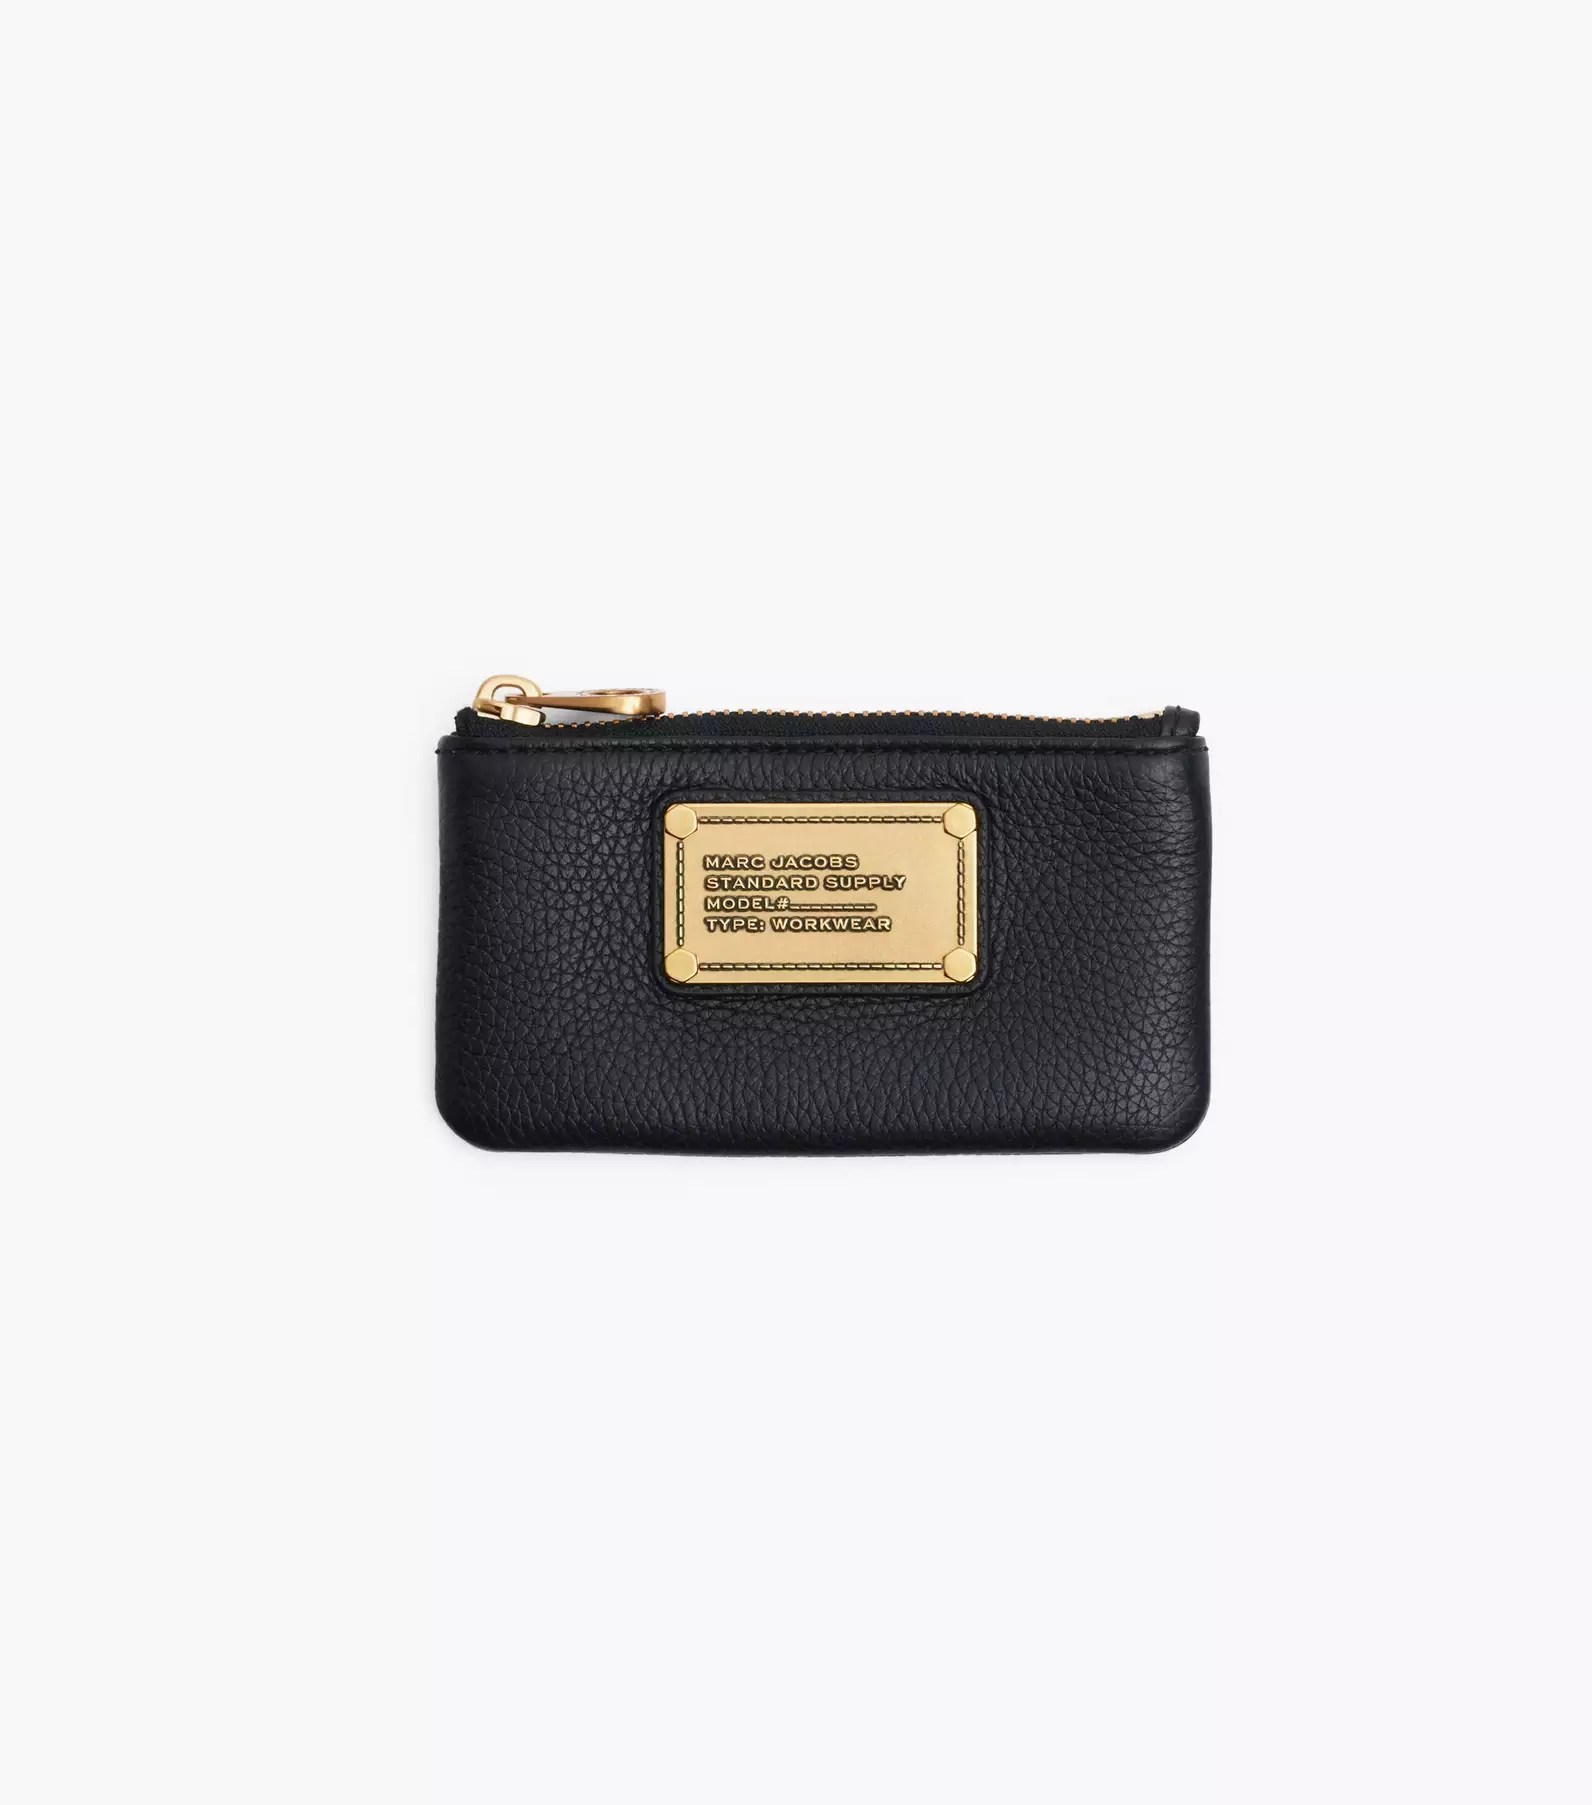 RE-EDITION CLASSIC Q KEY POUCH